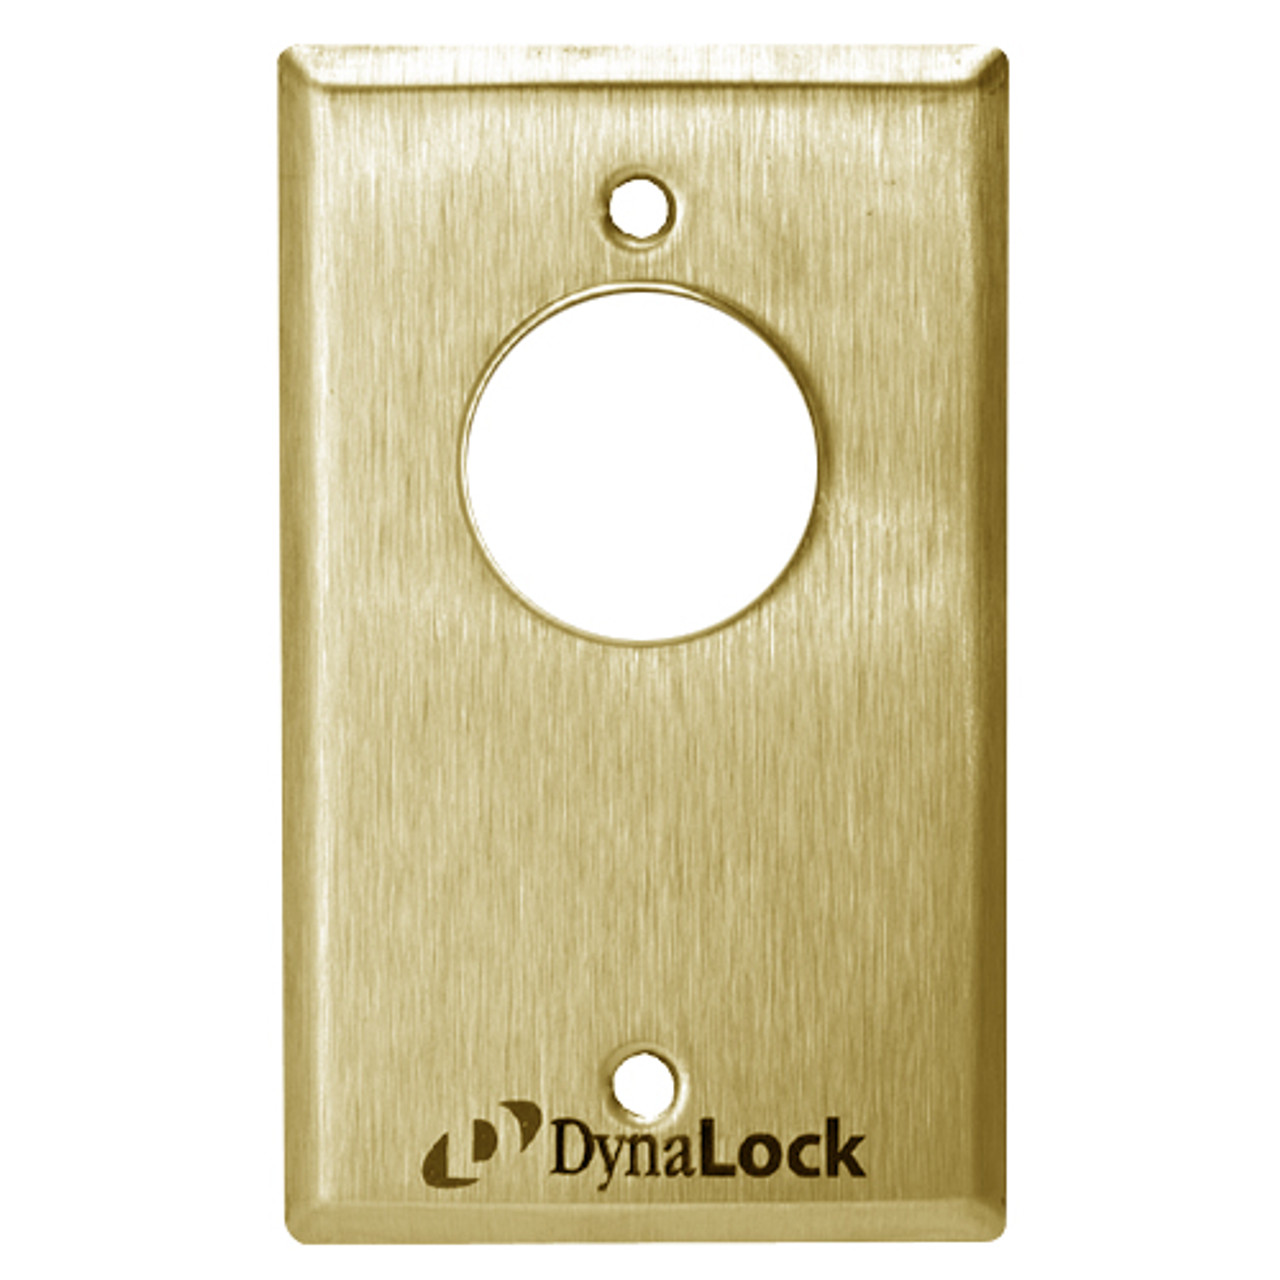 7001-US3-ATS DynaLock 7000 Series Keyswitches Maintained 1 Single Pole Double Throw with Anti-Tamper Switch in Bright Brass